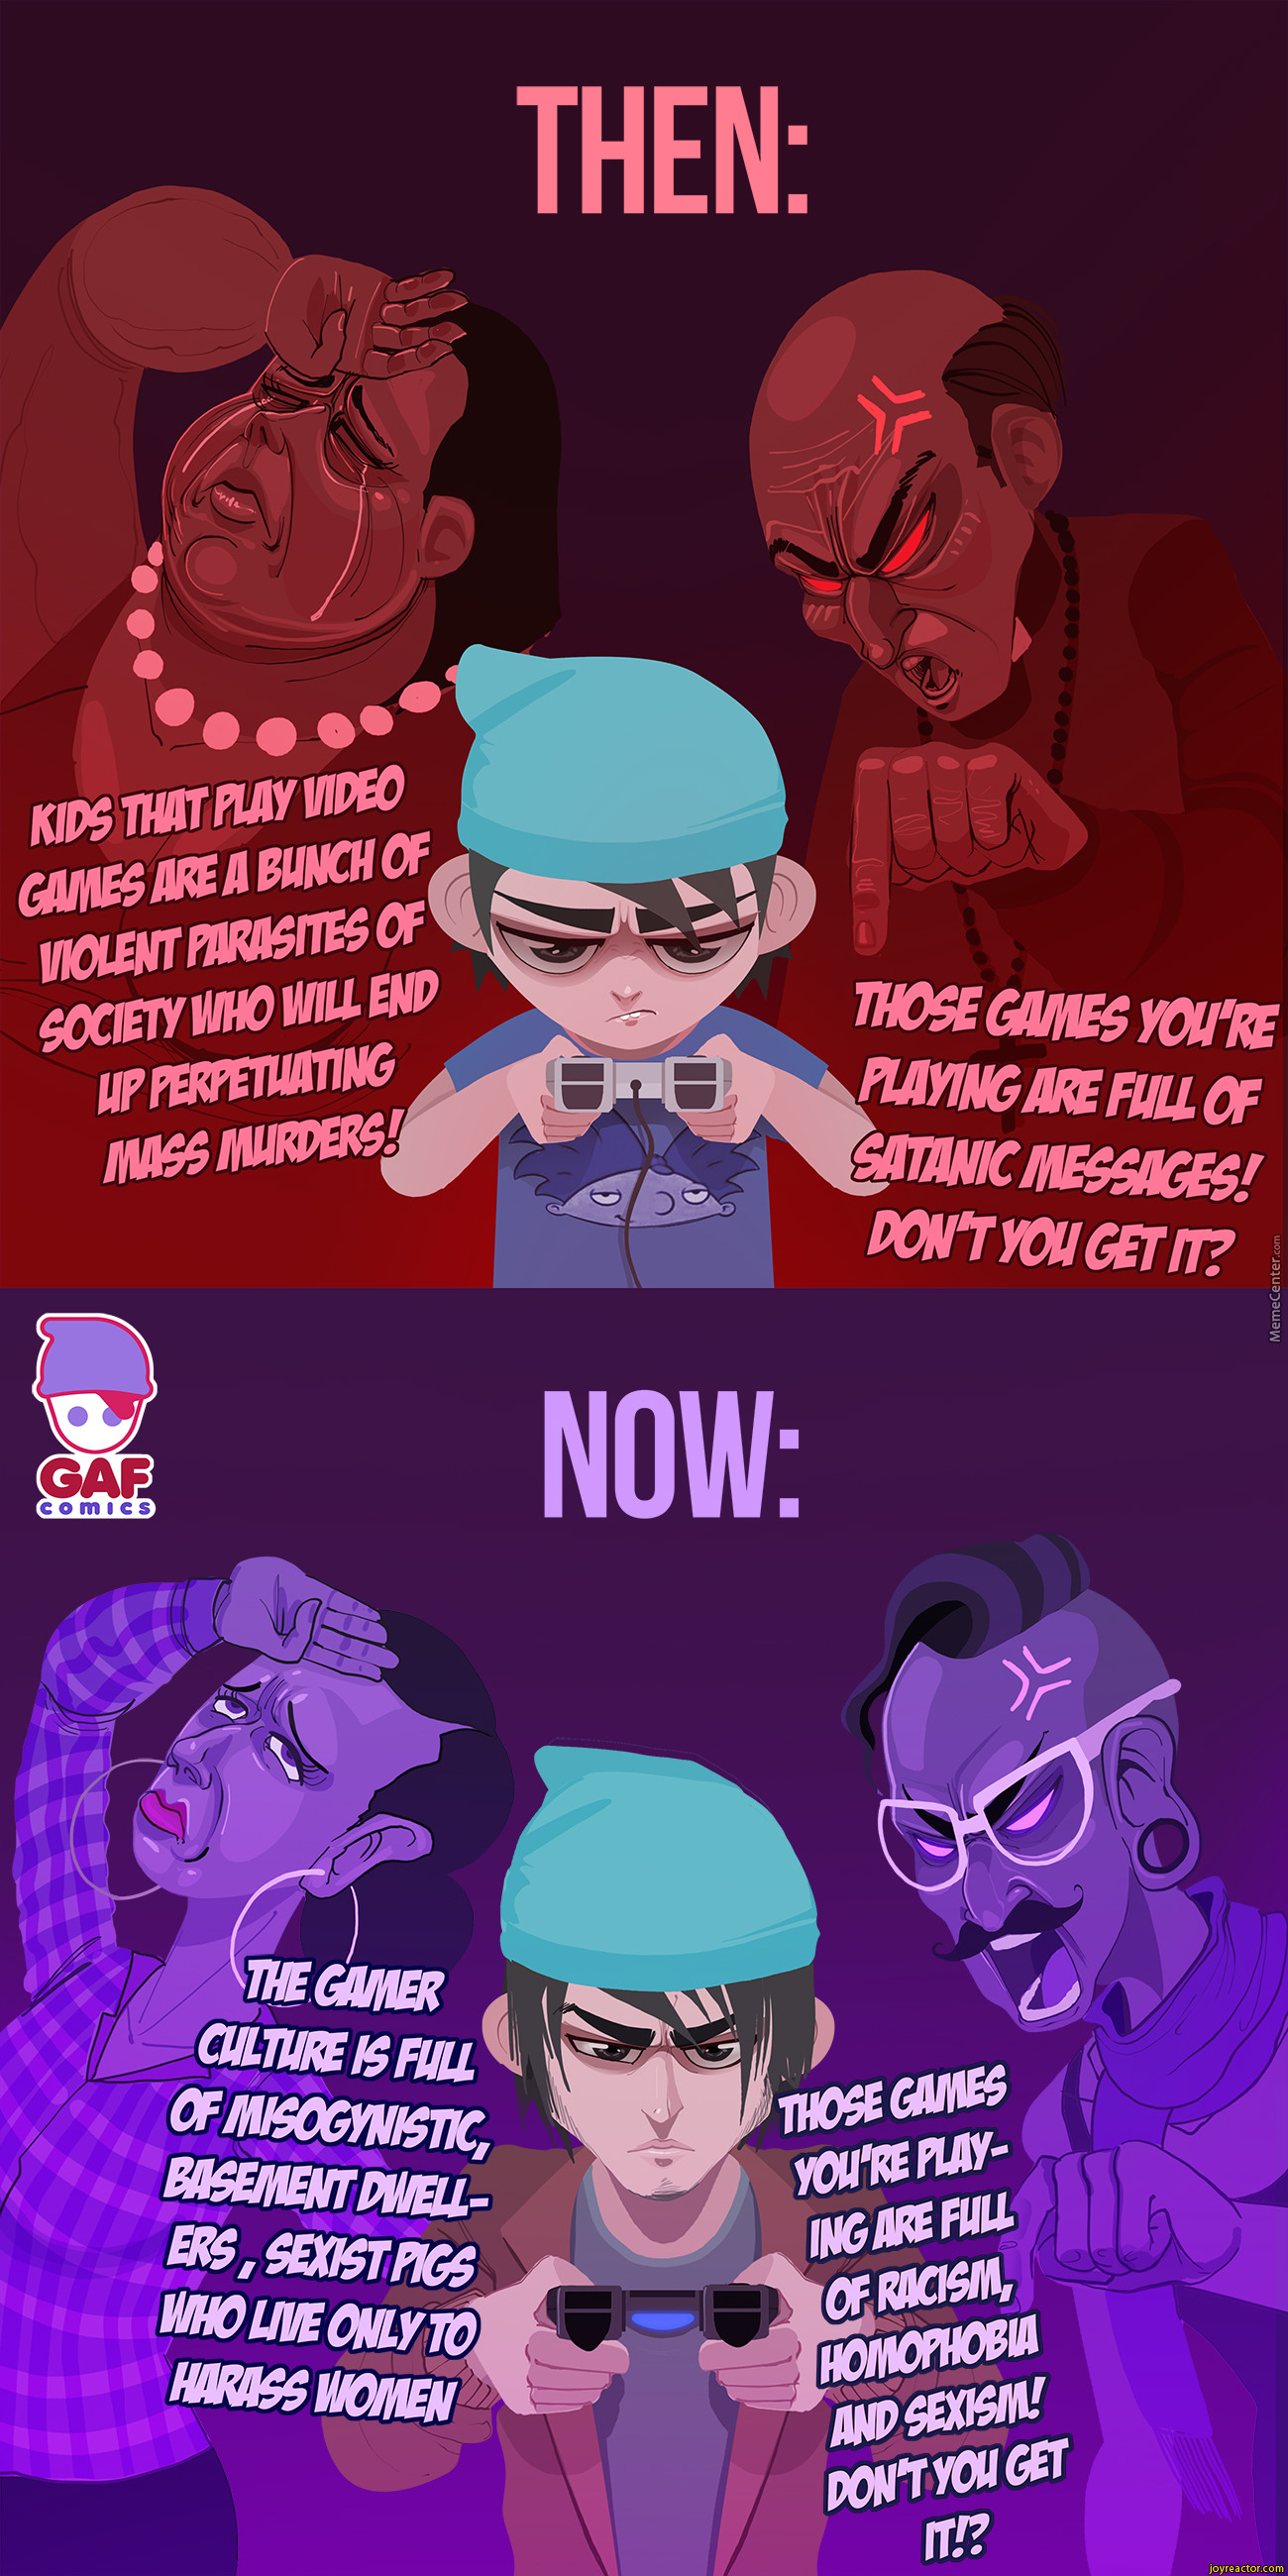 gamers then vs now - Then Kids Thit Alay Video Gues Ace A Bunch Of Kolent Parasites Of Socety Who Will End Afpervetting Mars Those Games You'Re Flaying Are Rill Of Stanic Messages! Don'T You Get It Gaf b Now The Gamer Altiesale Of Misogynisti, Basement We